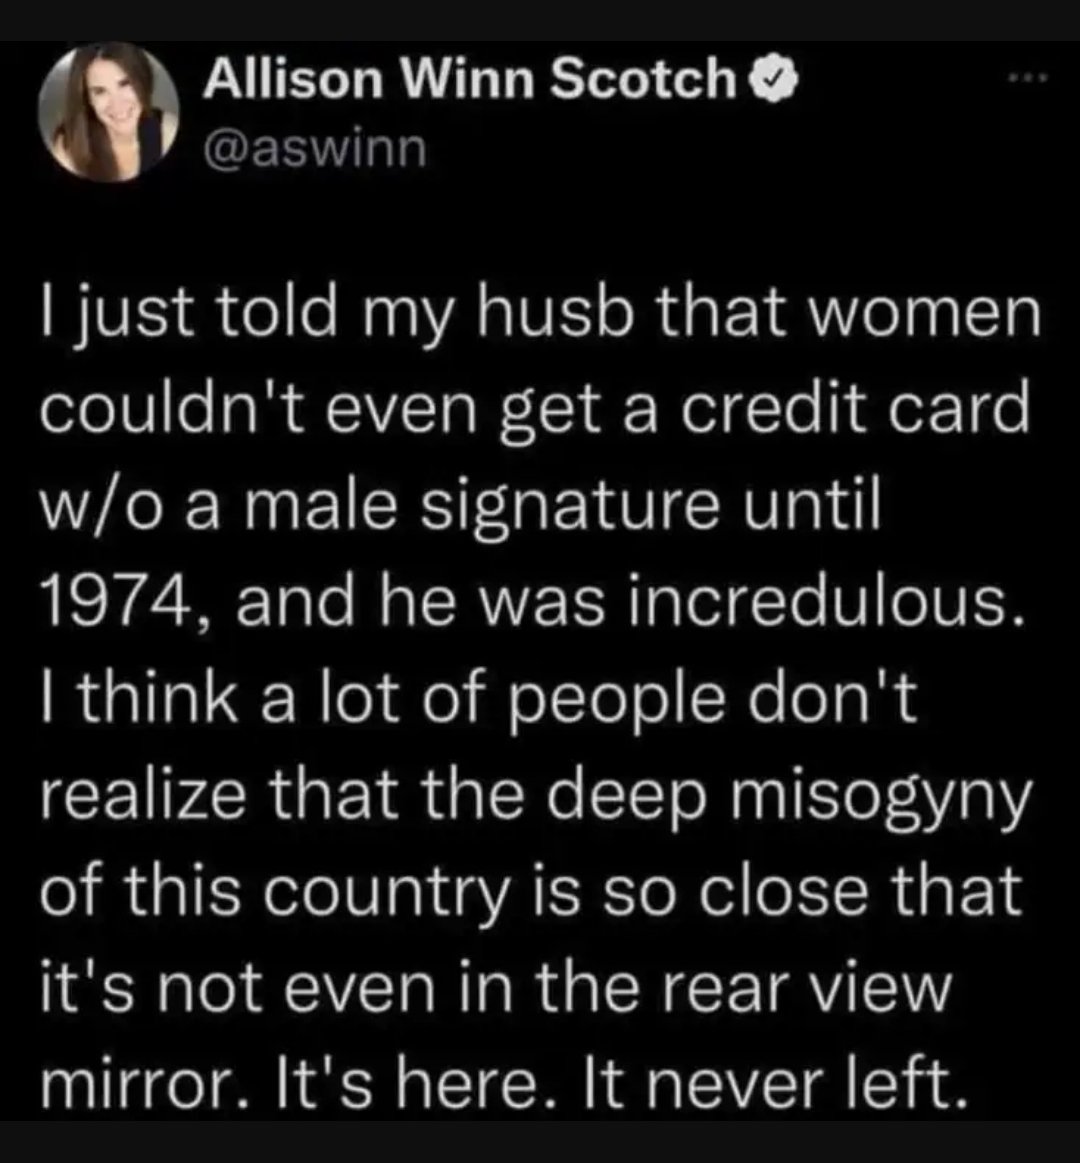 How much do you want to bet that this is total nonsense? Just like every other #Feminists argument?

Or, at the very least, grossly misrepresented?

I seem to recall men were obligated to their wife's debts, incidentally.